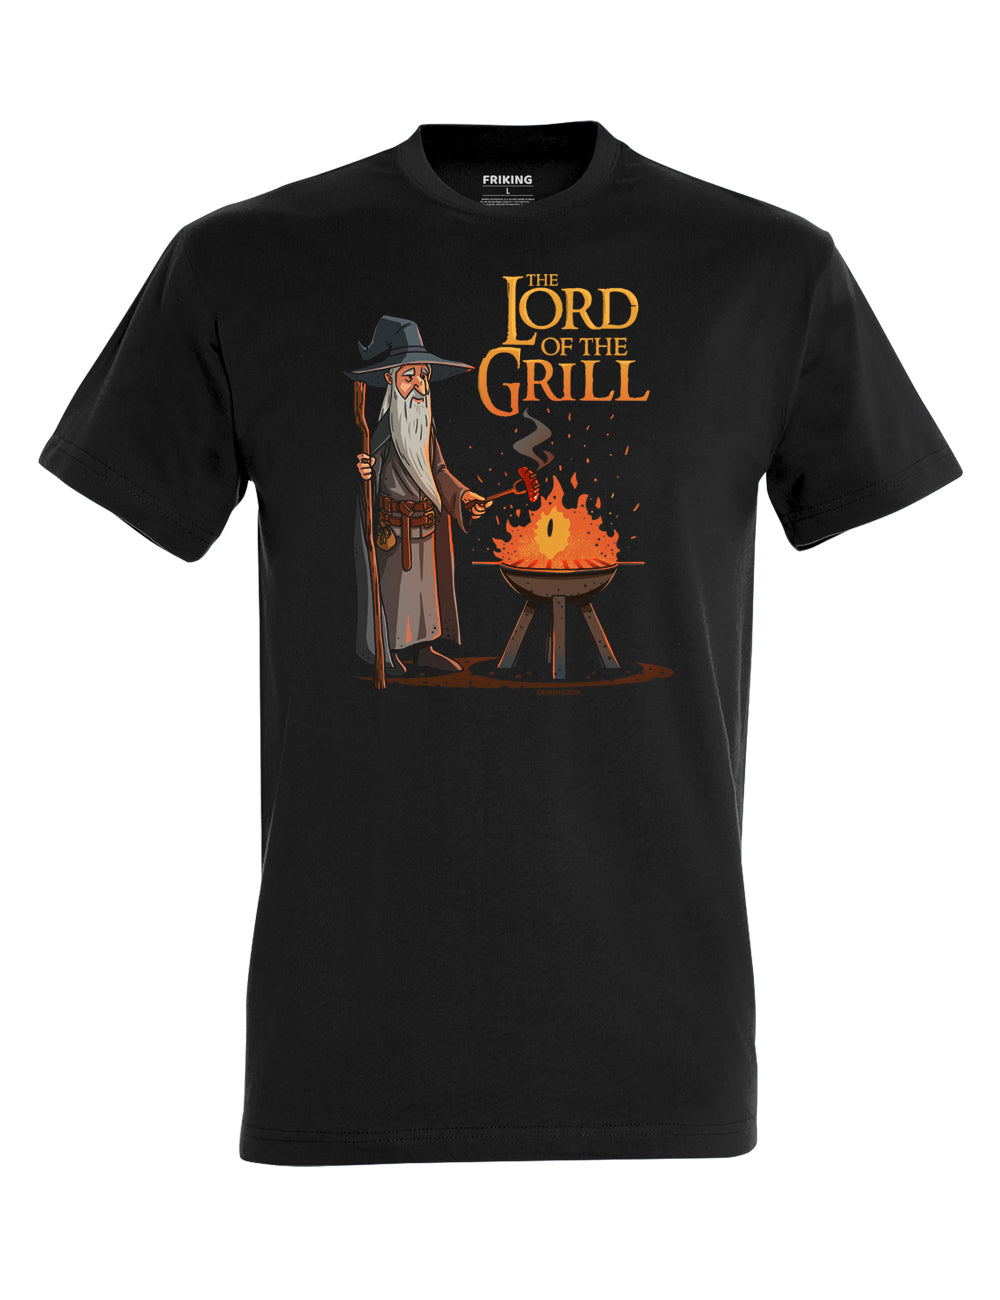 The lord of the grill